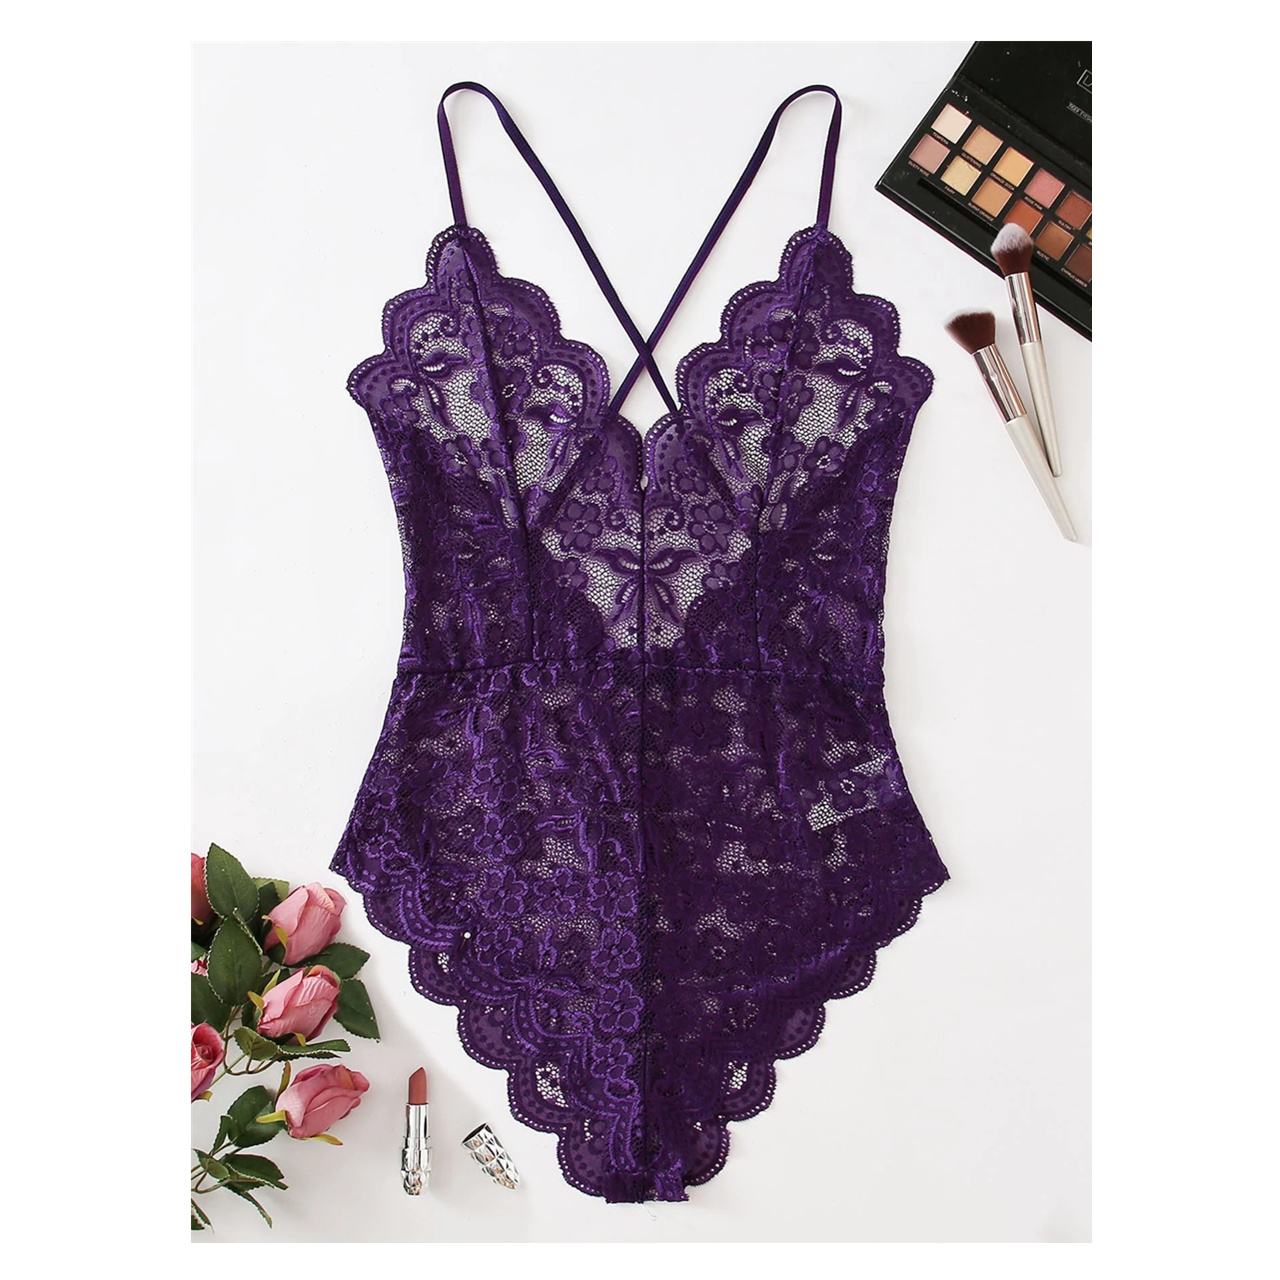  floral scalloped lace teddy bodysuit